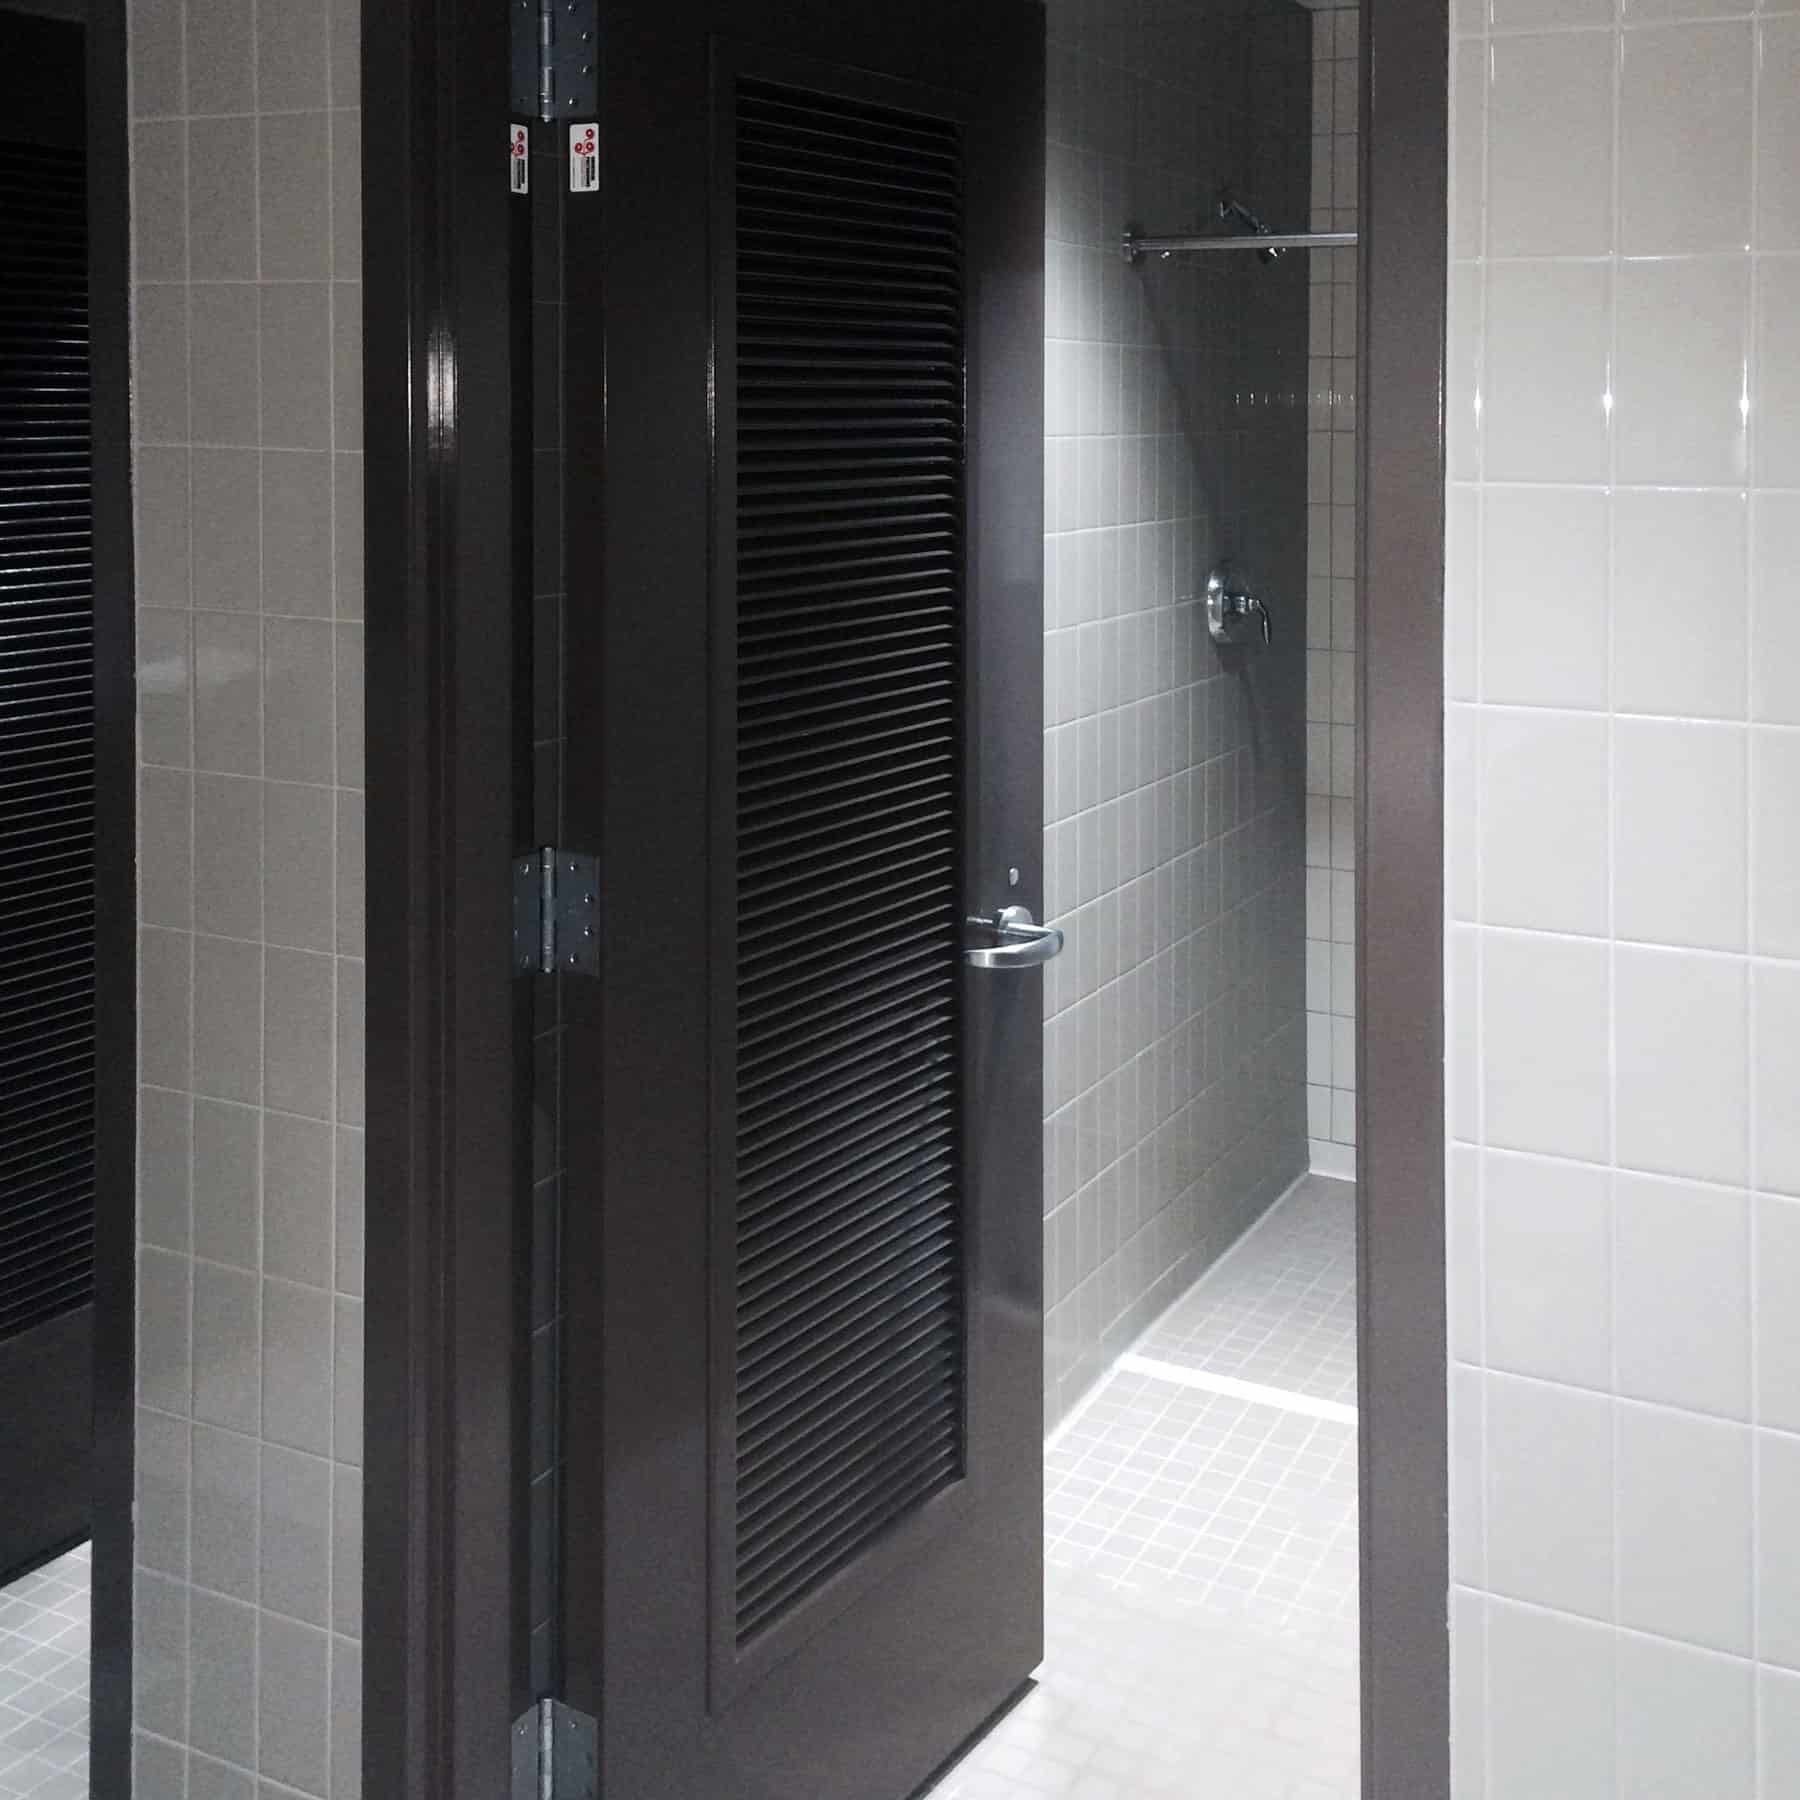 A bathroom with a black door that has undergone required ASTM E-84 testing for fiberglass doors.